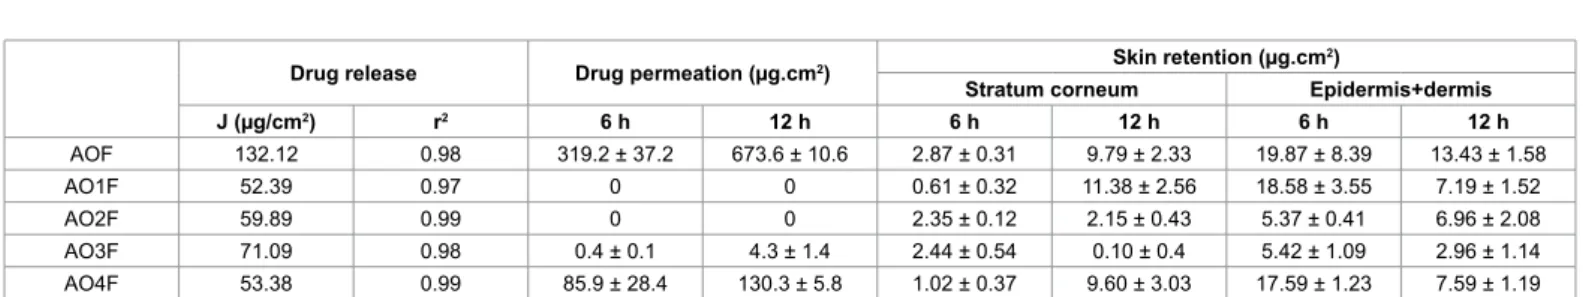 Table 3: Flux (J) and correlation coeficient (r 2 ) derived from drug release curves, drug permeated through the skin at 6 h and 12 h, and drug retained in the stratum  corneum and in the epidermis + dermis at 6 h and 12 h